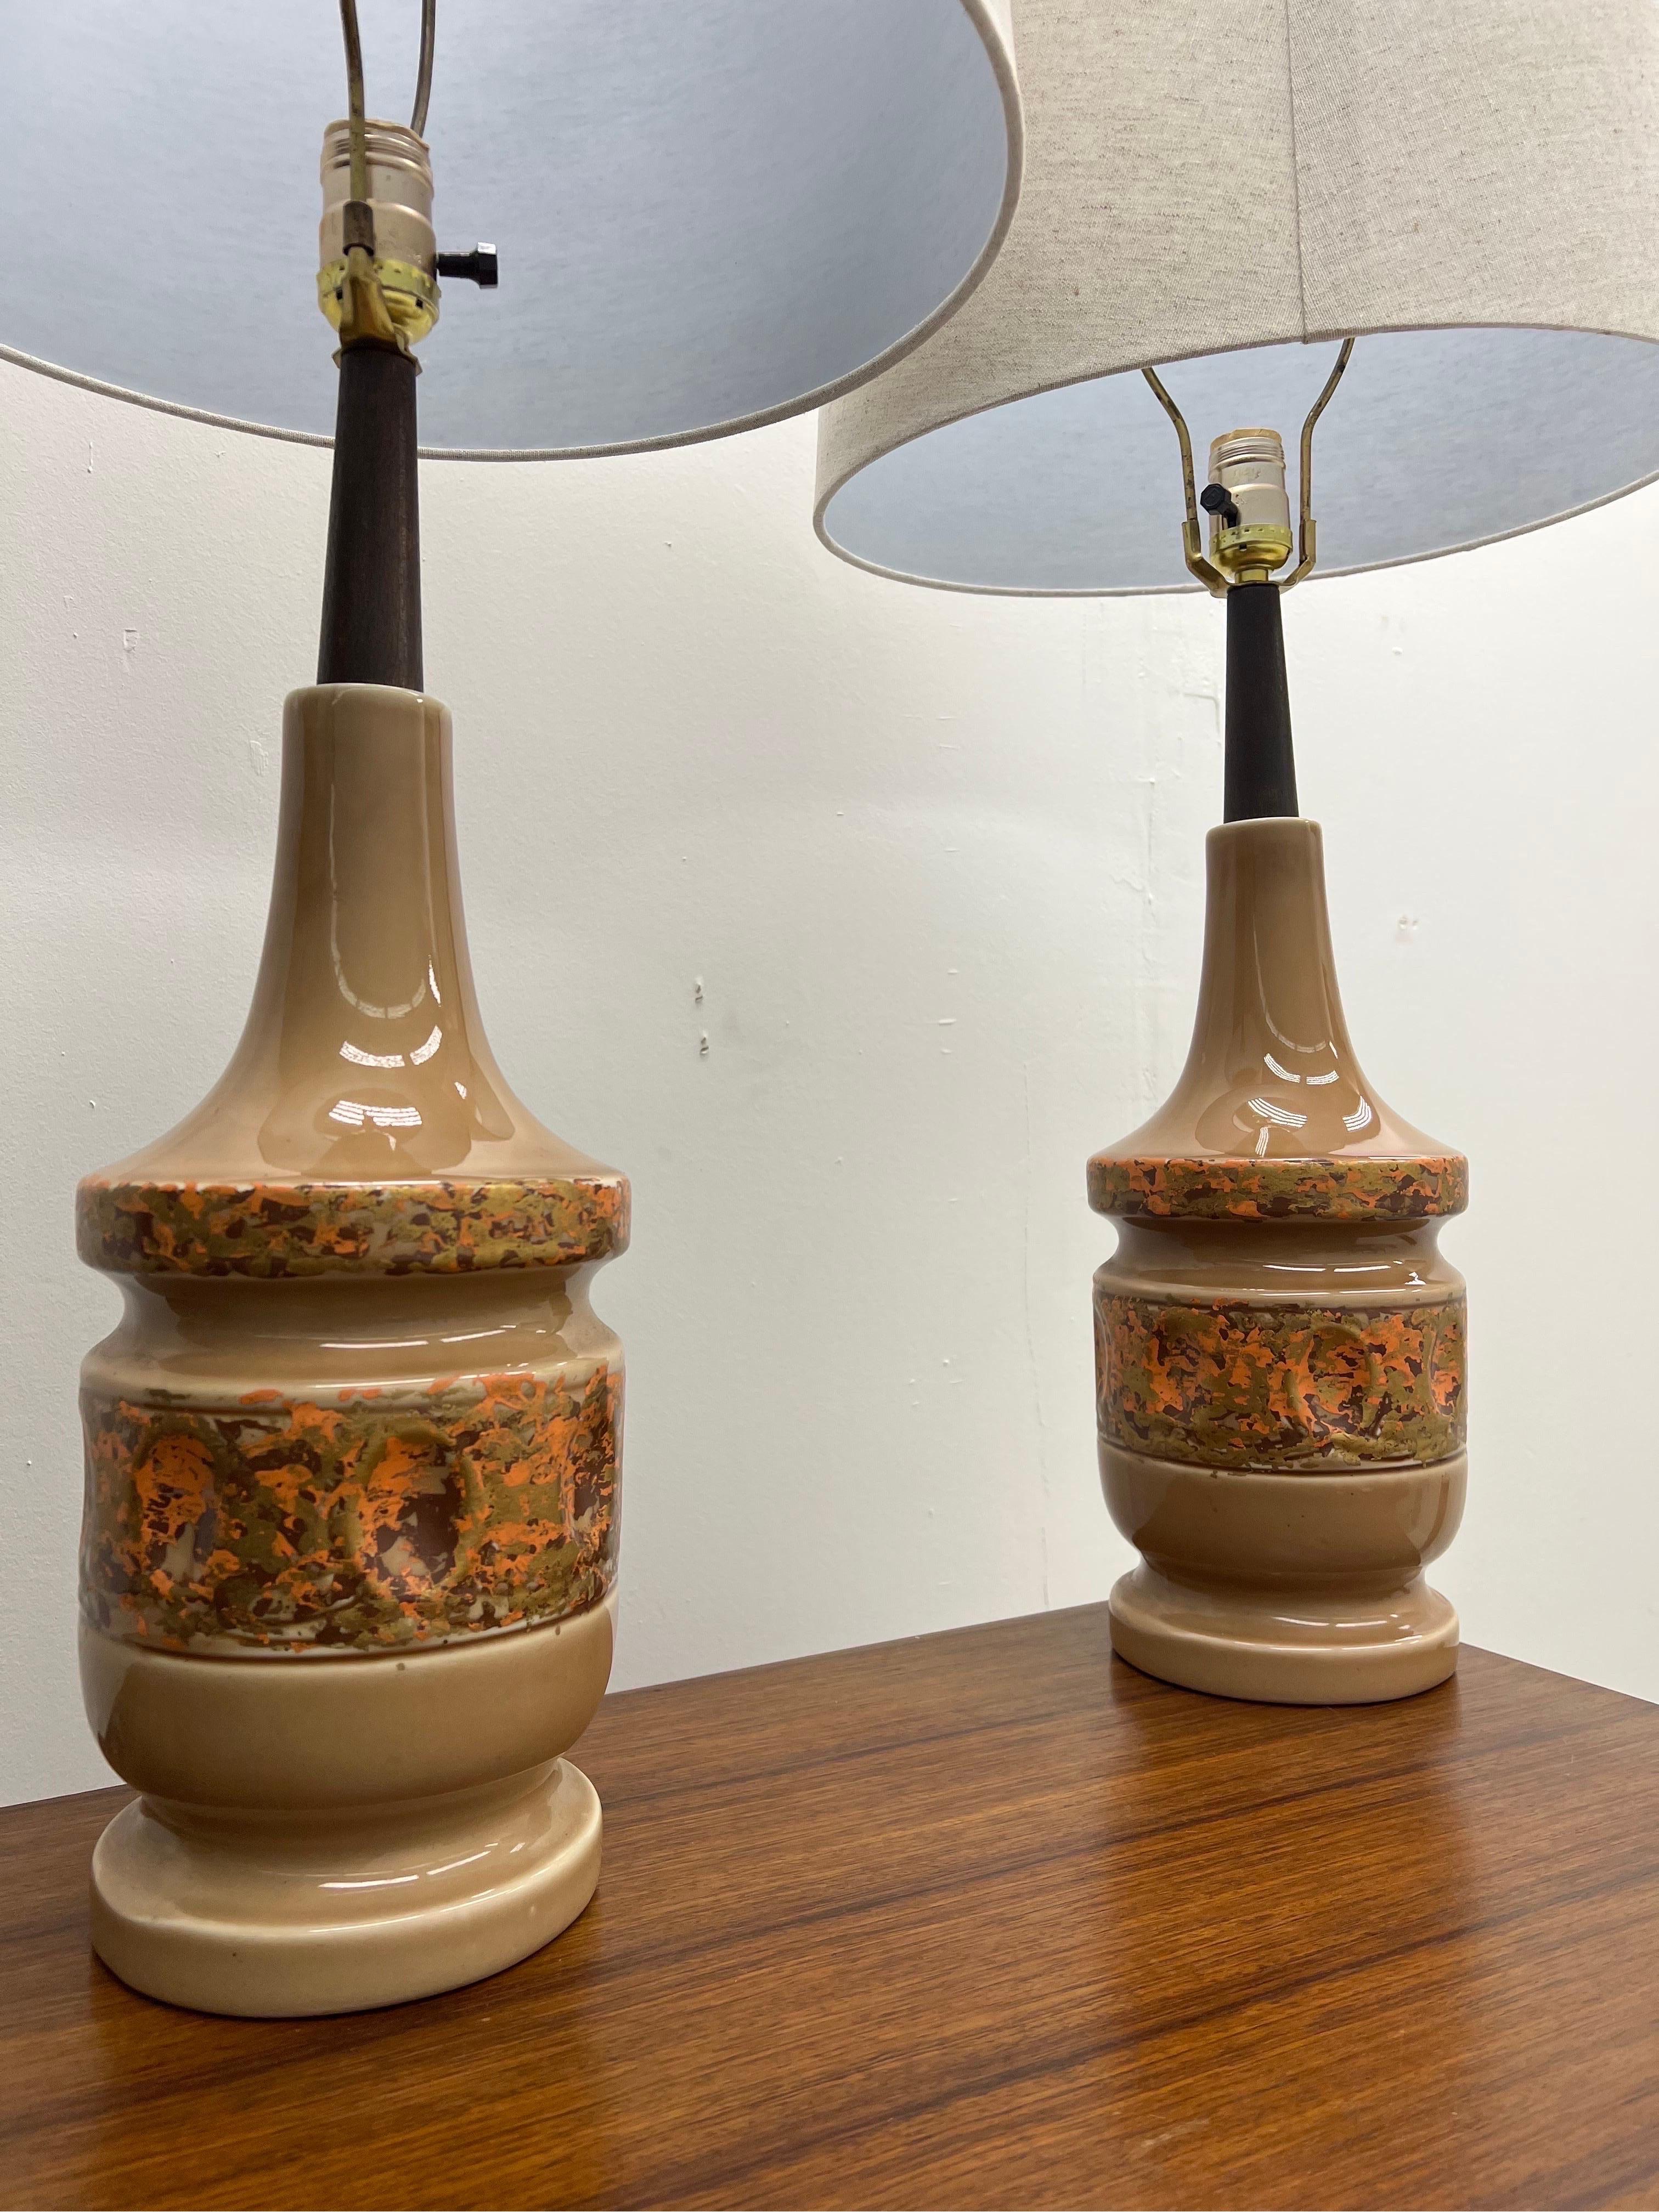 Vintage Mid-Century Modern lamps set of 2.

Dimensions: Approx 16 W; 30 H.